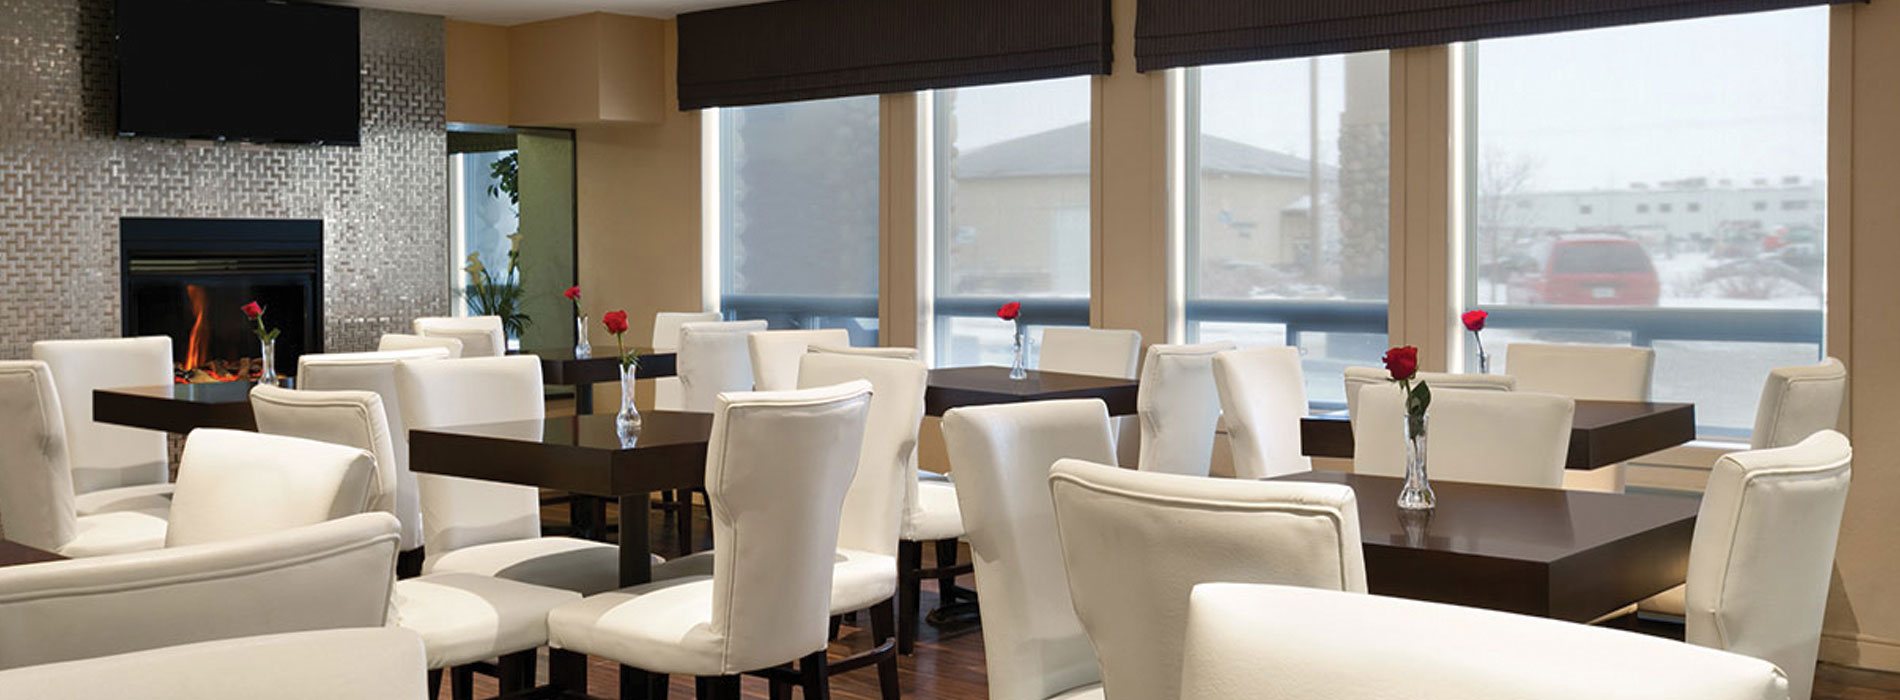 Natural light from large windows in the dining area at d3h Days Inn Regina, reflect off the shiny metallic surround of the glass enclosed fireplace, with a flatscreen TV mounted above.  Single red roses in bud vases sit atop square eating tables surrounded by white upholstered dining chairs.